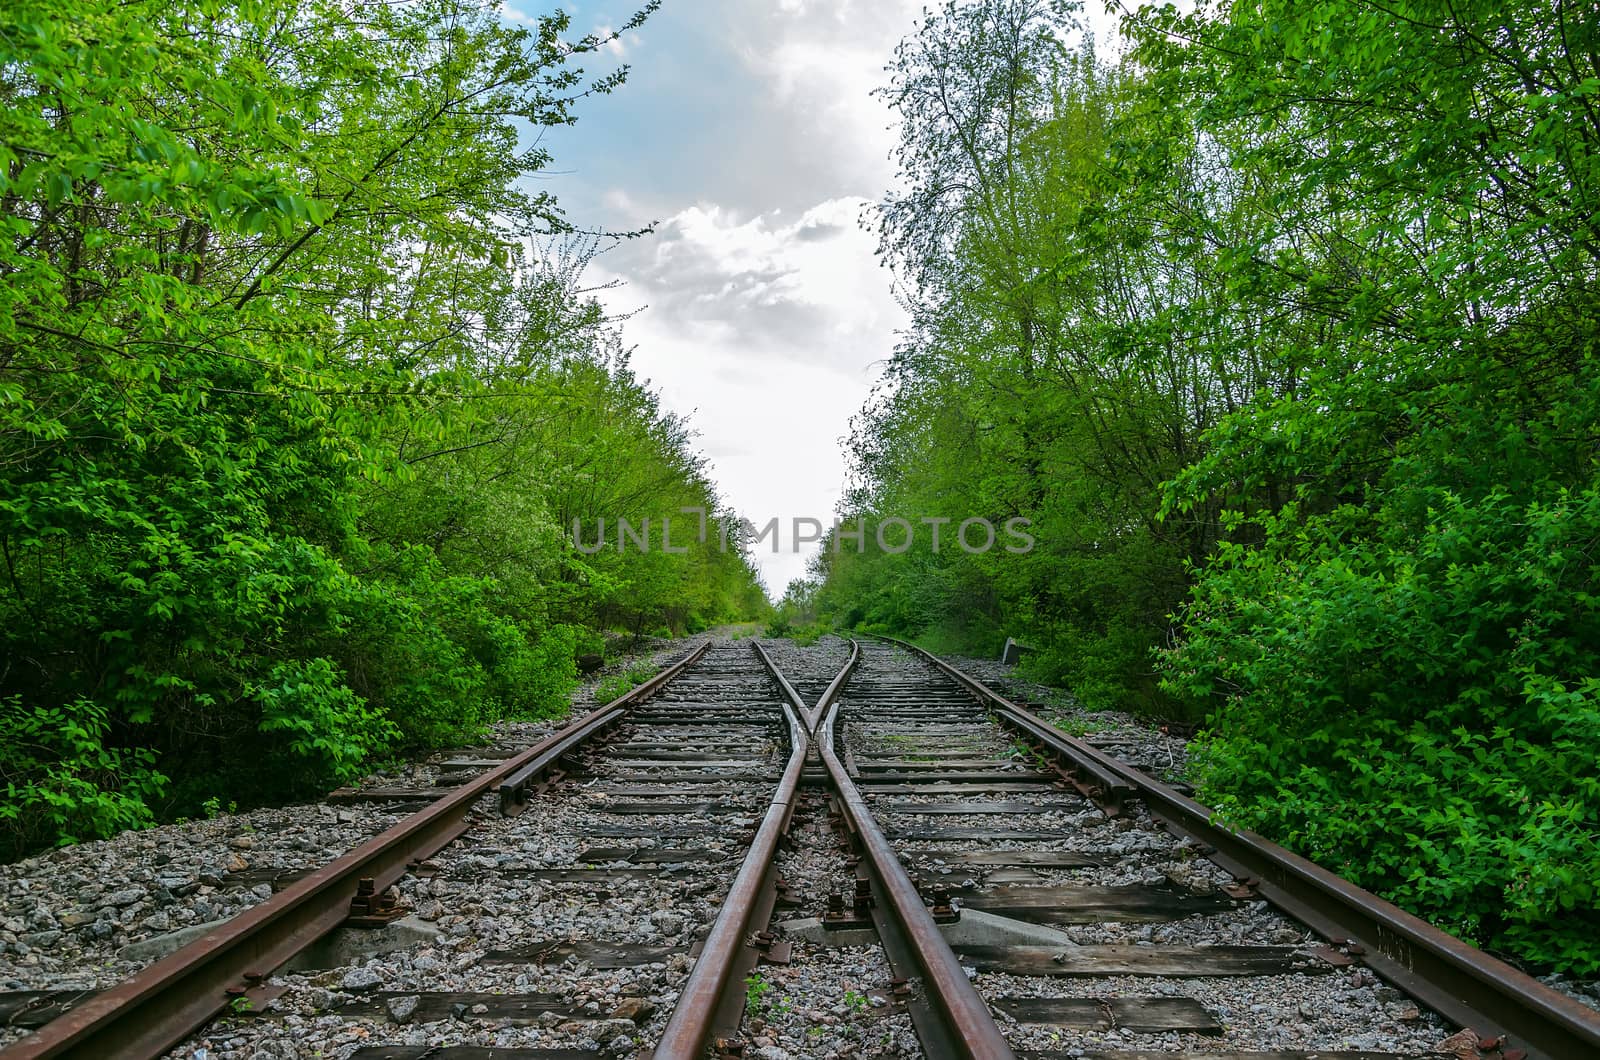 crossing of two railroads in wood by mycola